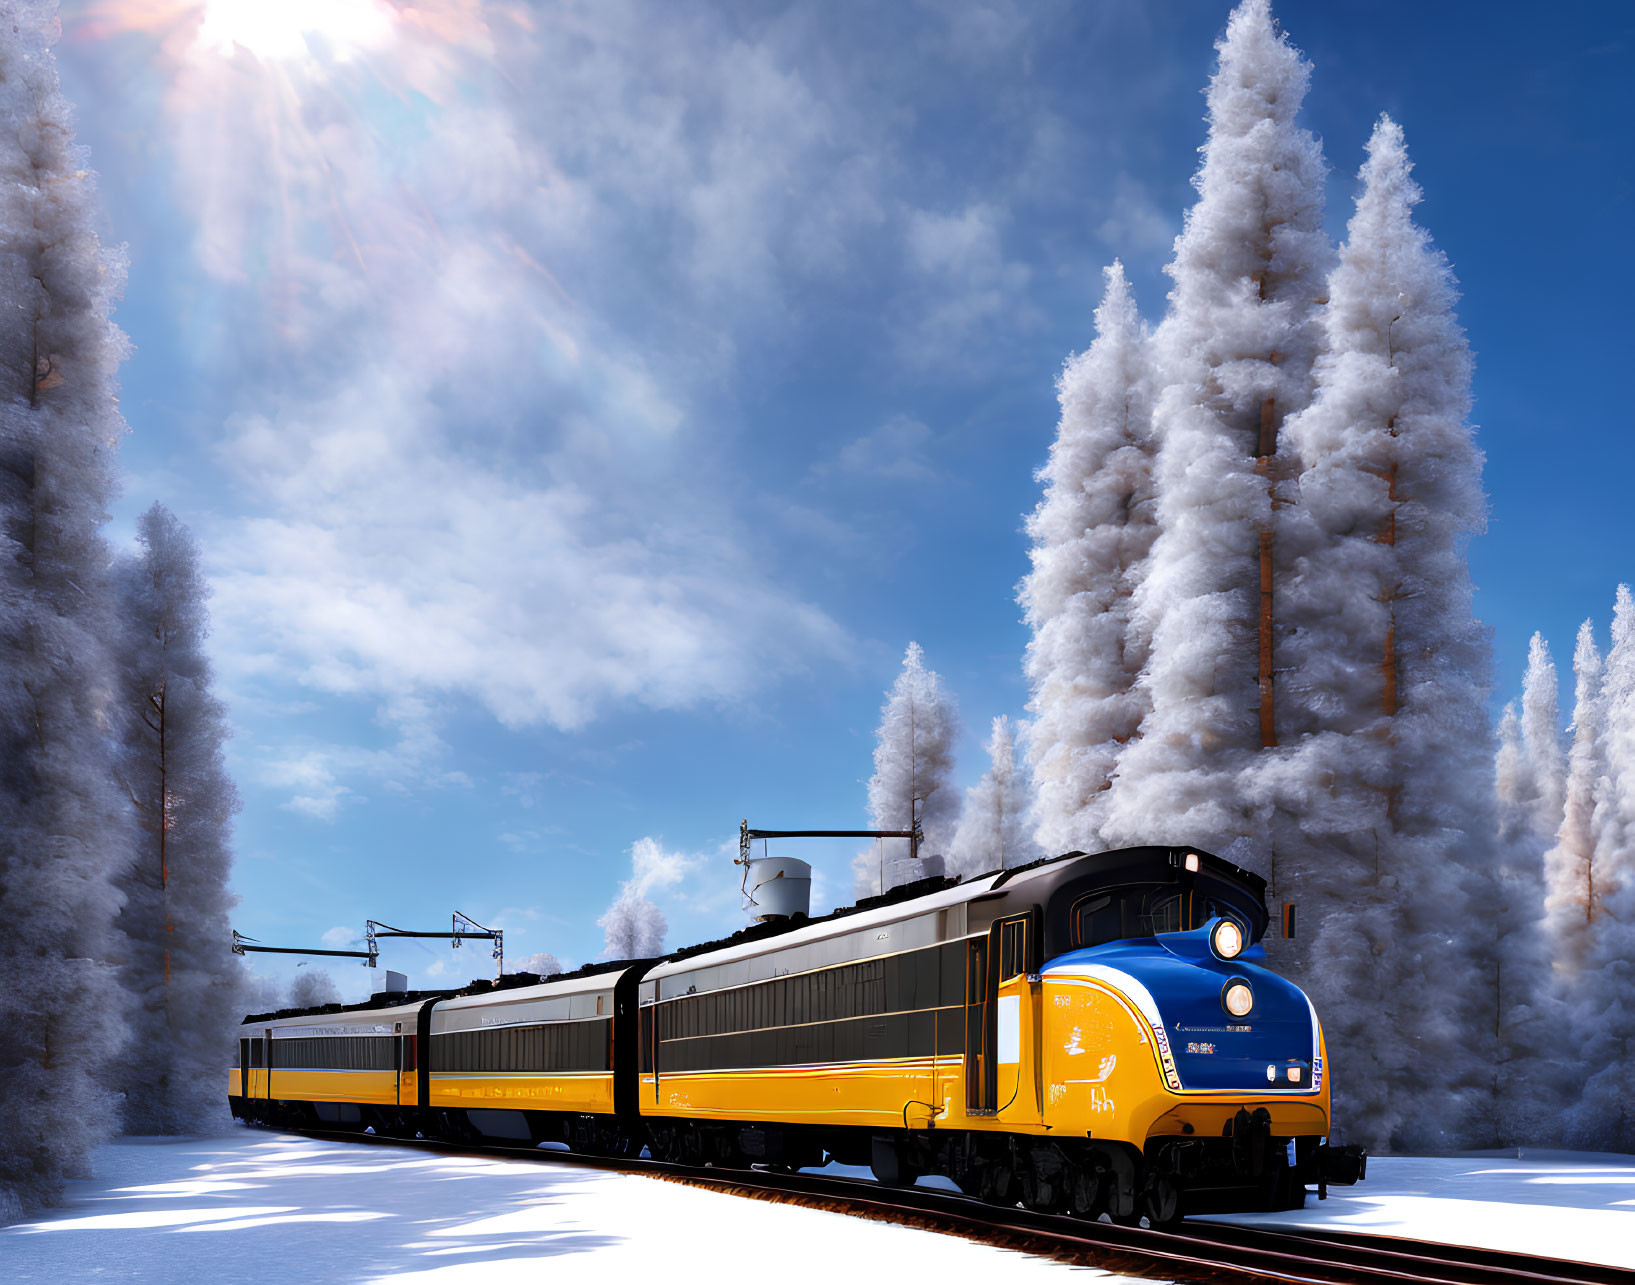 Vintage Blue and Yellow Train in Snowy Landscape with Frost-Covered Pine Trees